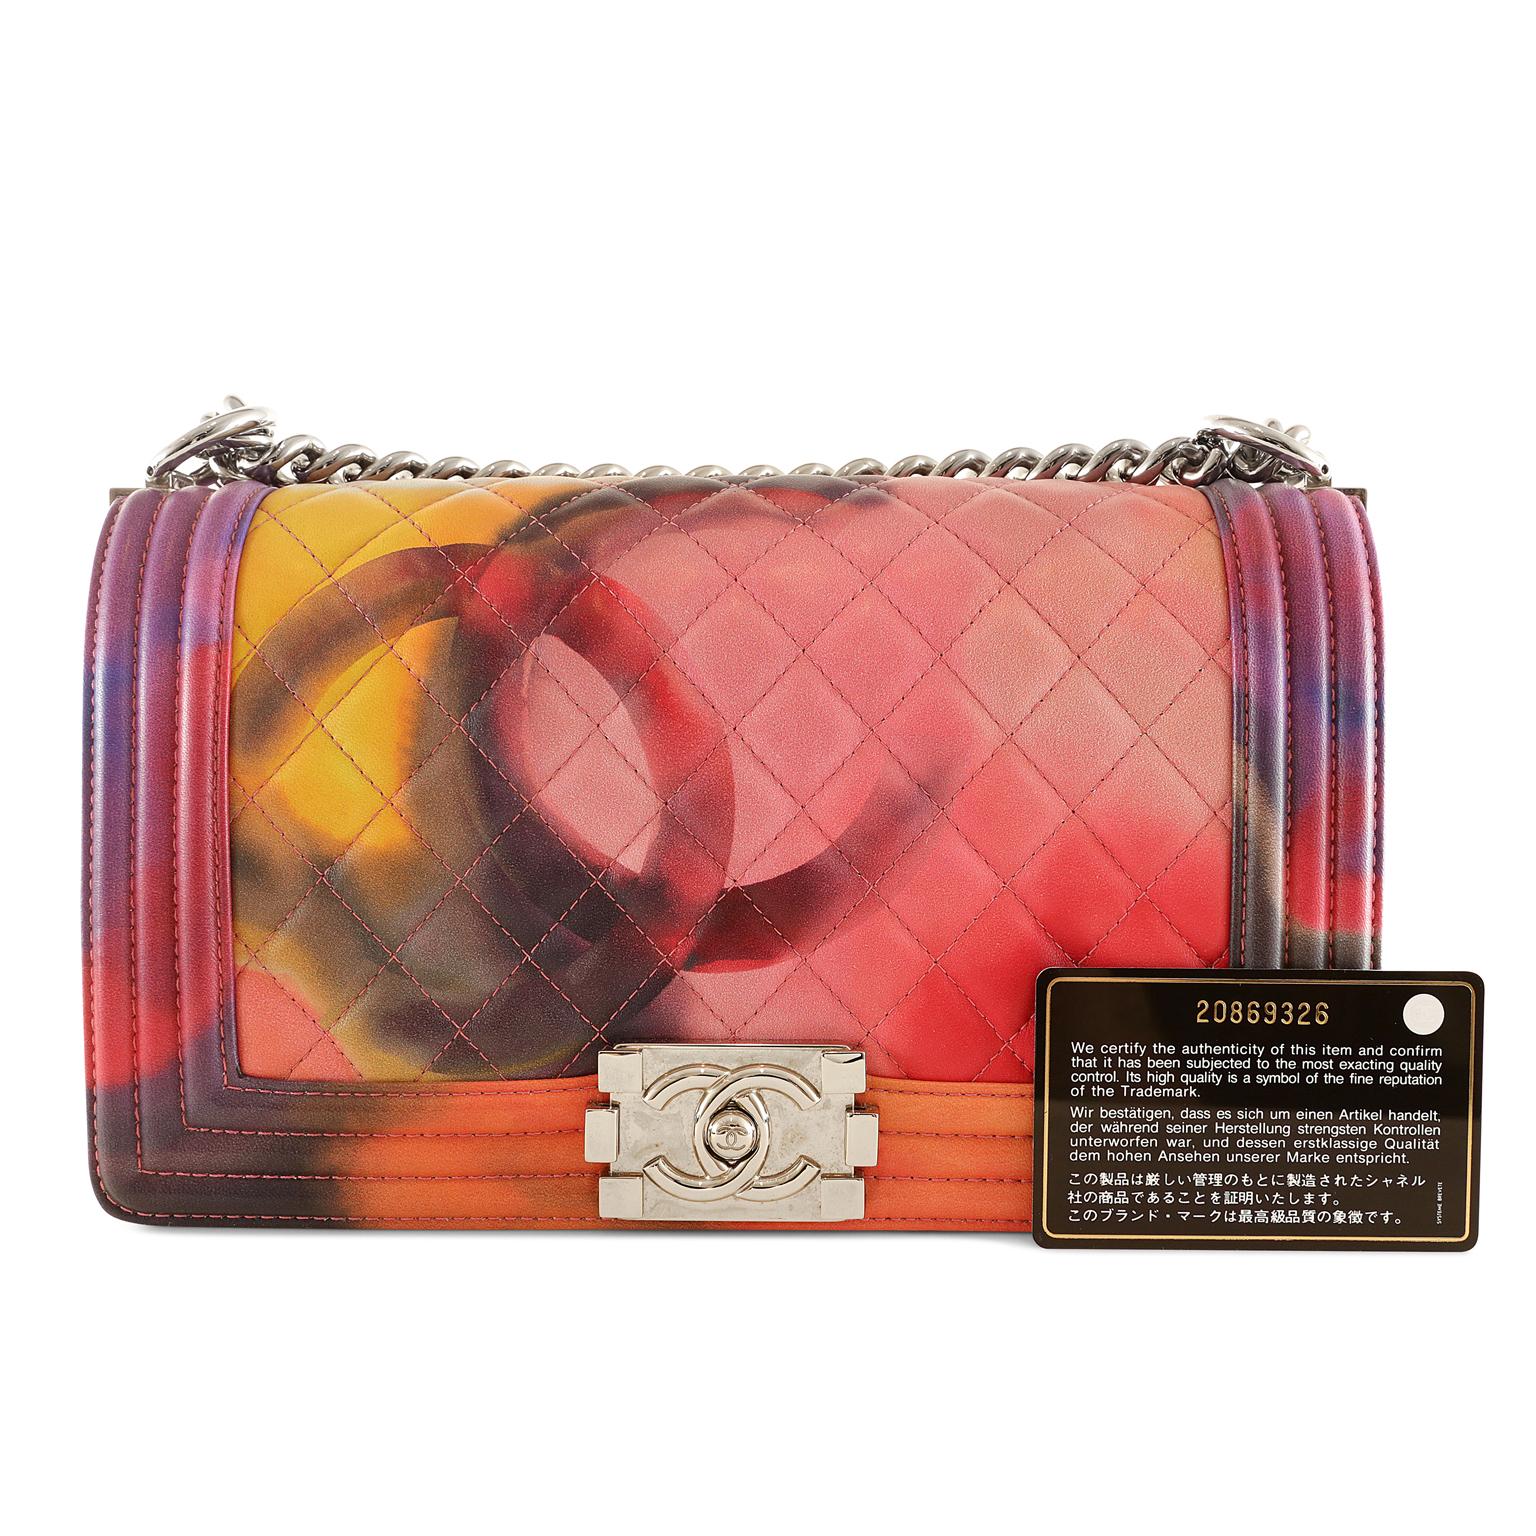 Chanel Flower Power Multicolor Leather Boy Bag- Special Edition 2